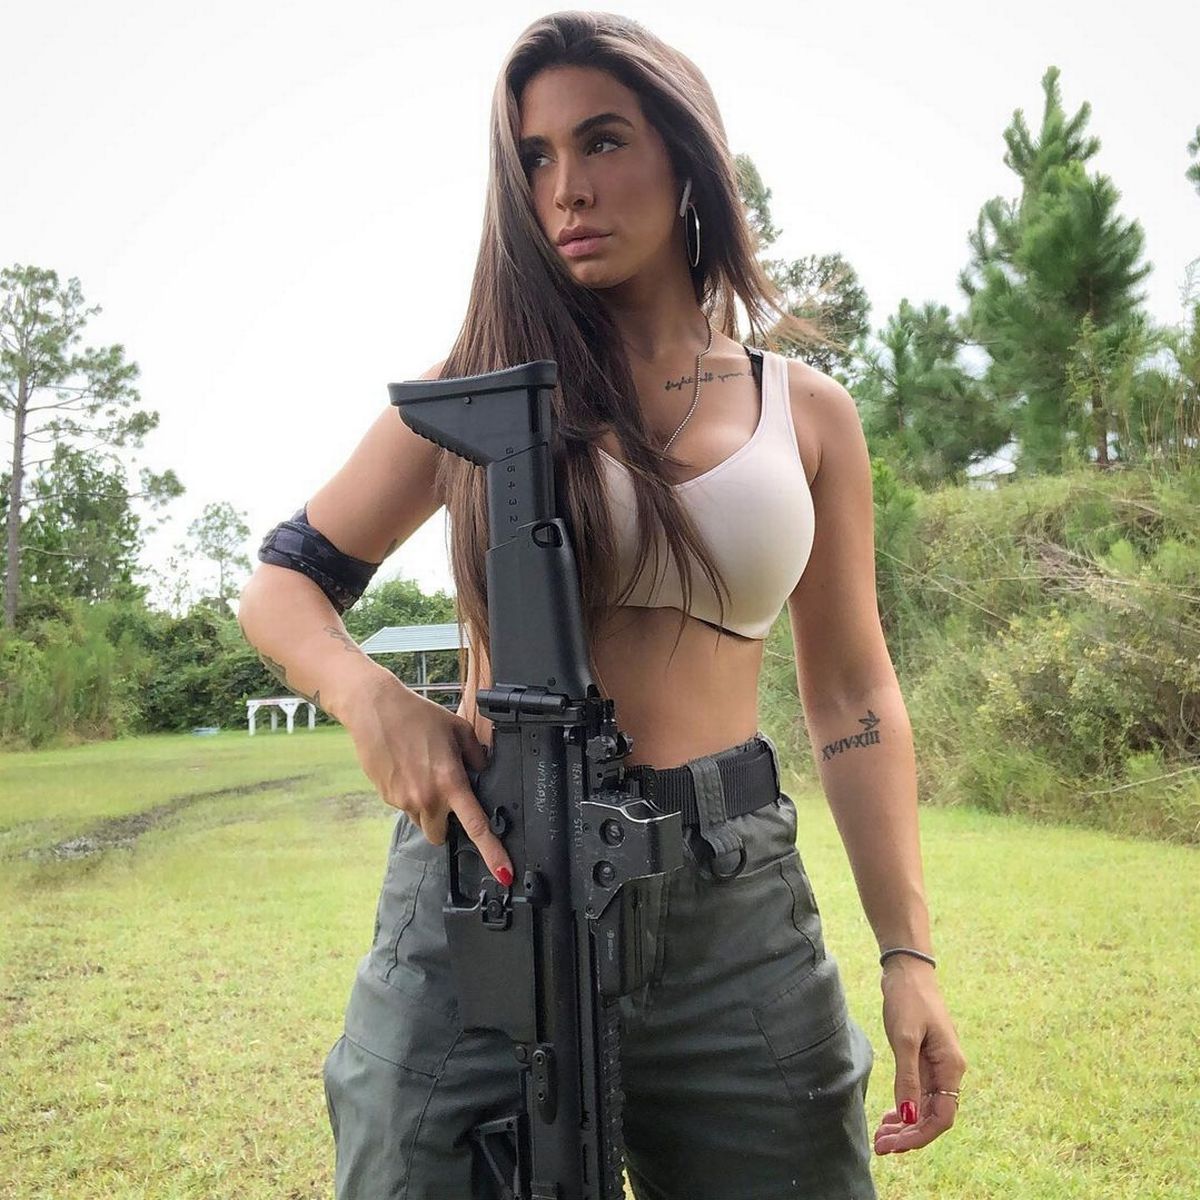 Queen of Guns Model dubbed wants more Women should Own a gun to stop Violence!